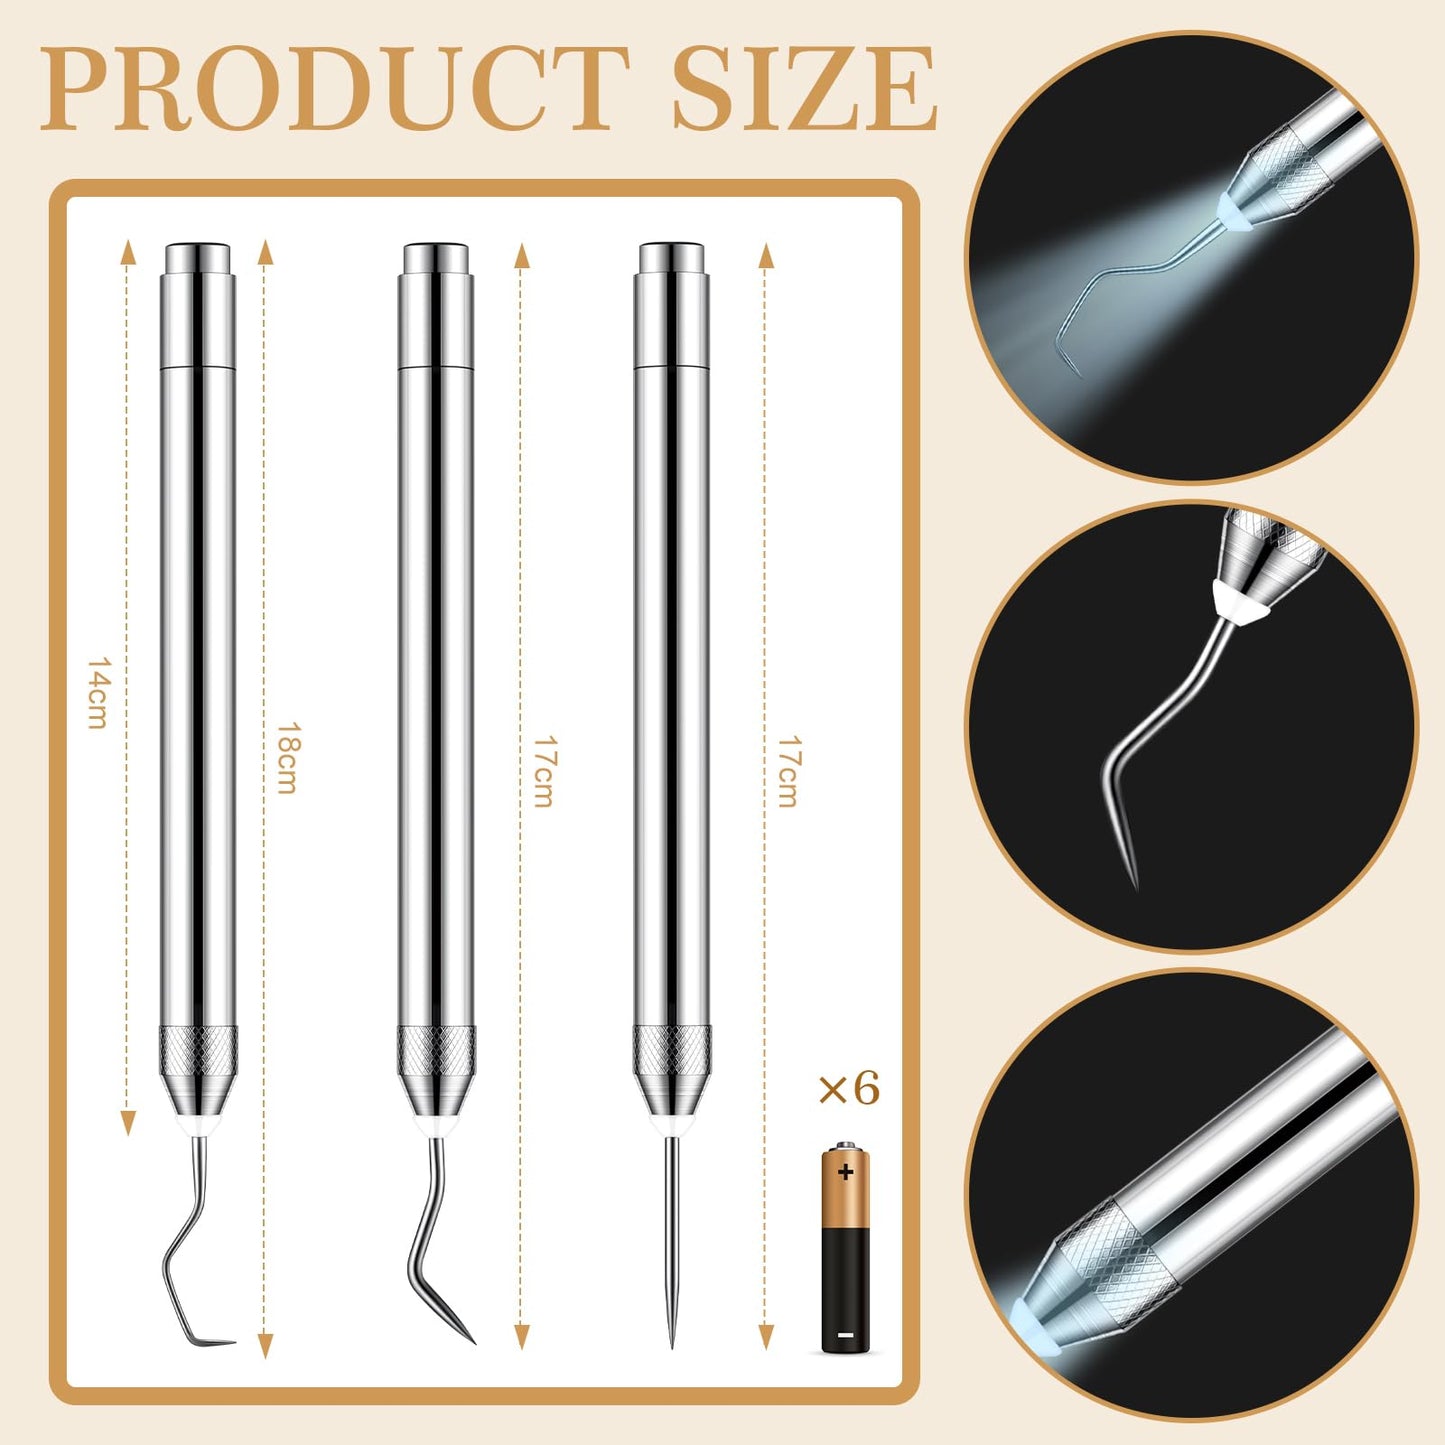 3 Pcs Weeding Tools for Vinyl with LED Light Set Pin Pen Weeding Tool Weeding Pen Craft Tweezers Pin Tools for Cutting Machines Crafting Accessories